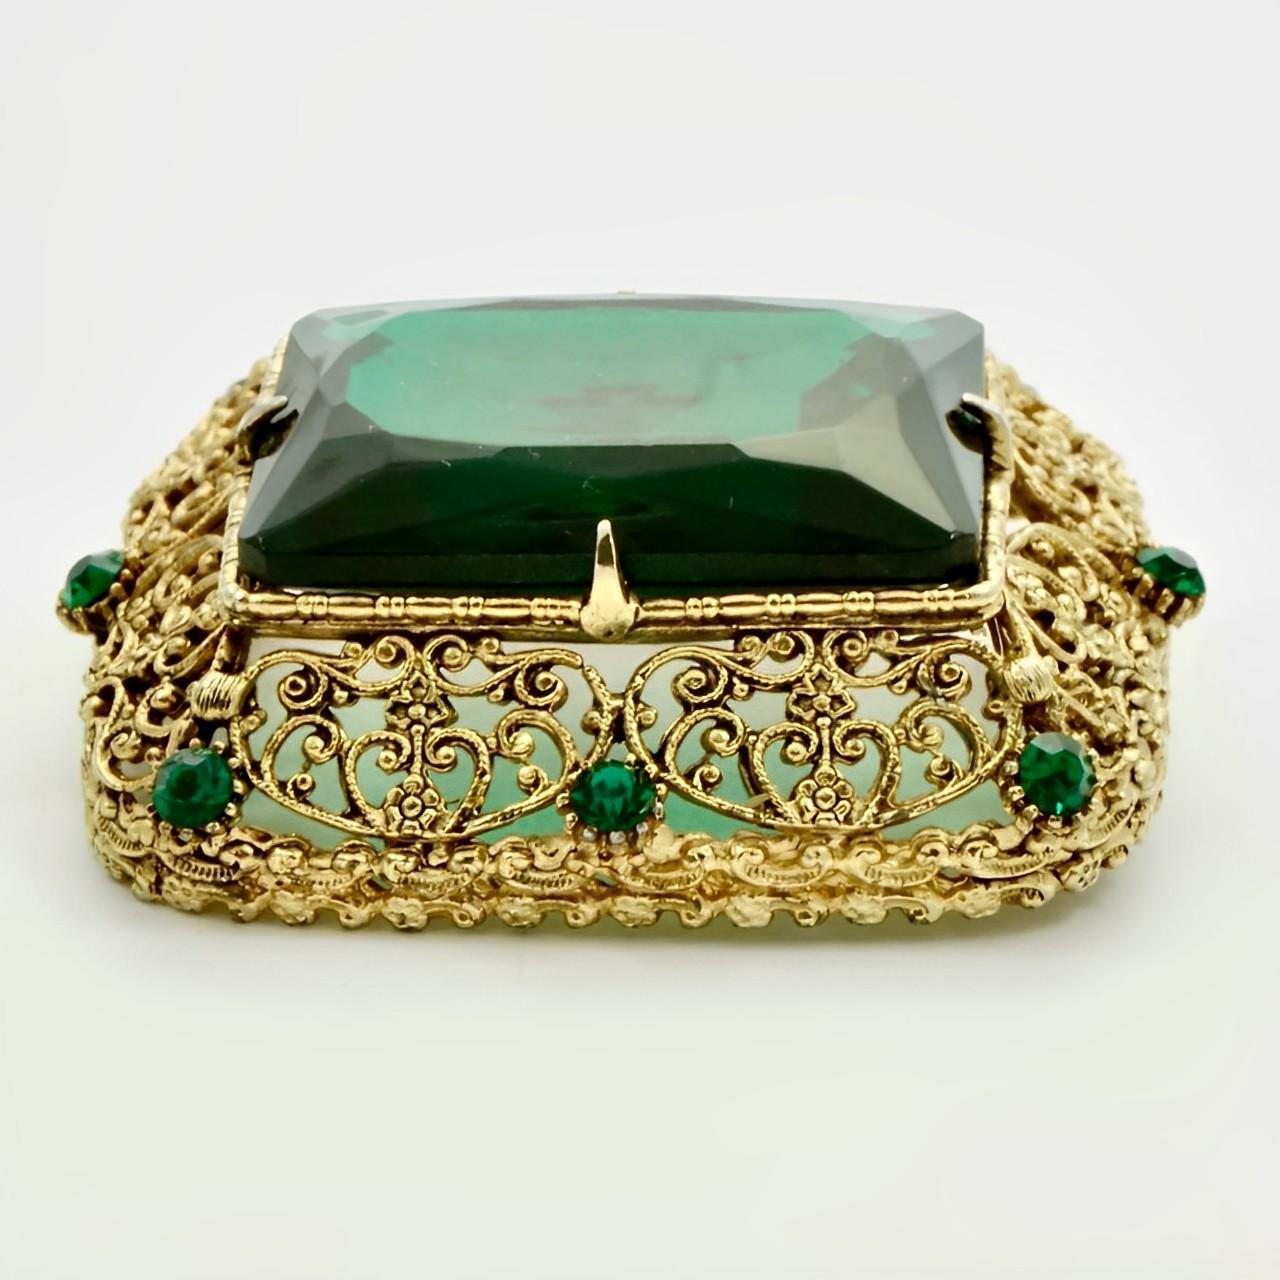 Women's or Men's Gold Plated Filigree and Emerald Green Glass Statement Brooch circa 1960s For Sale